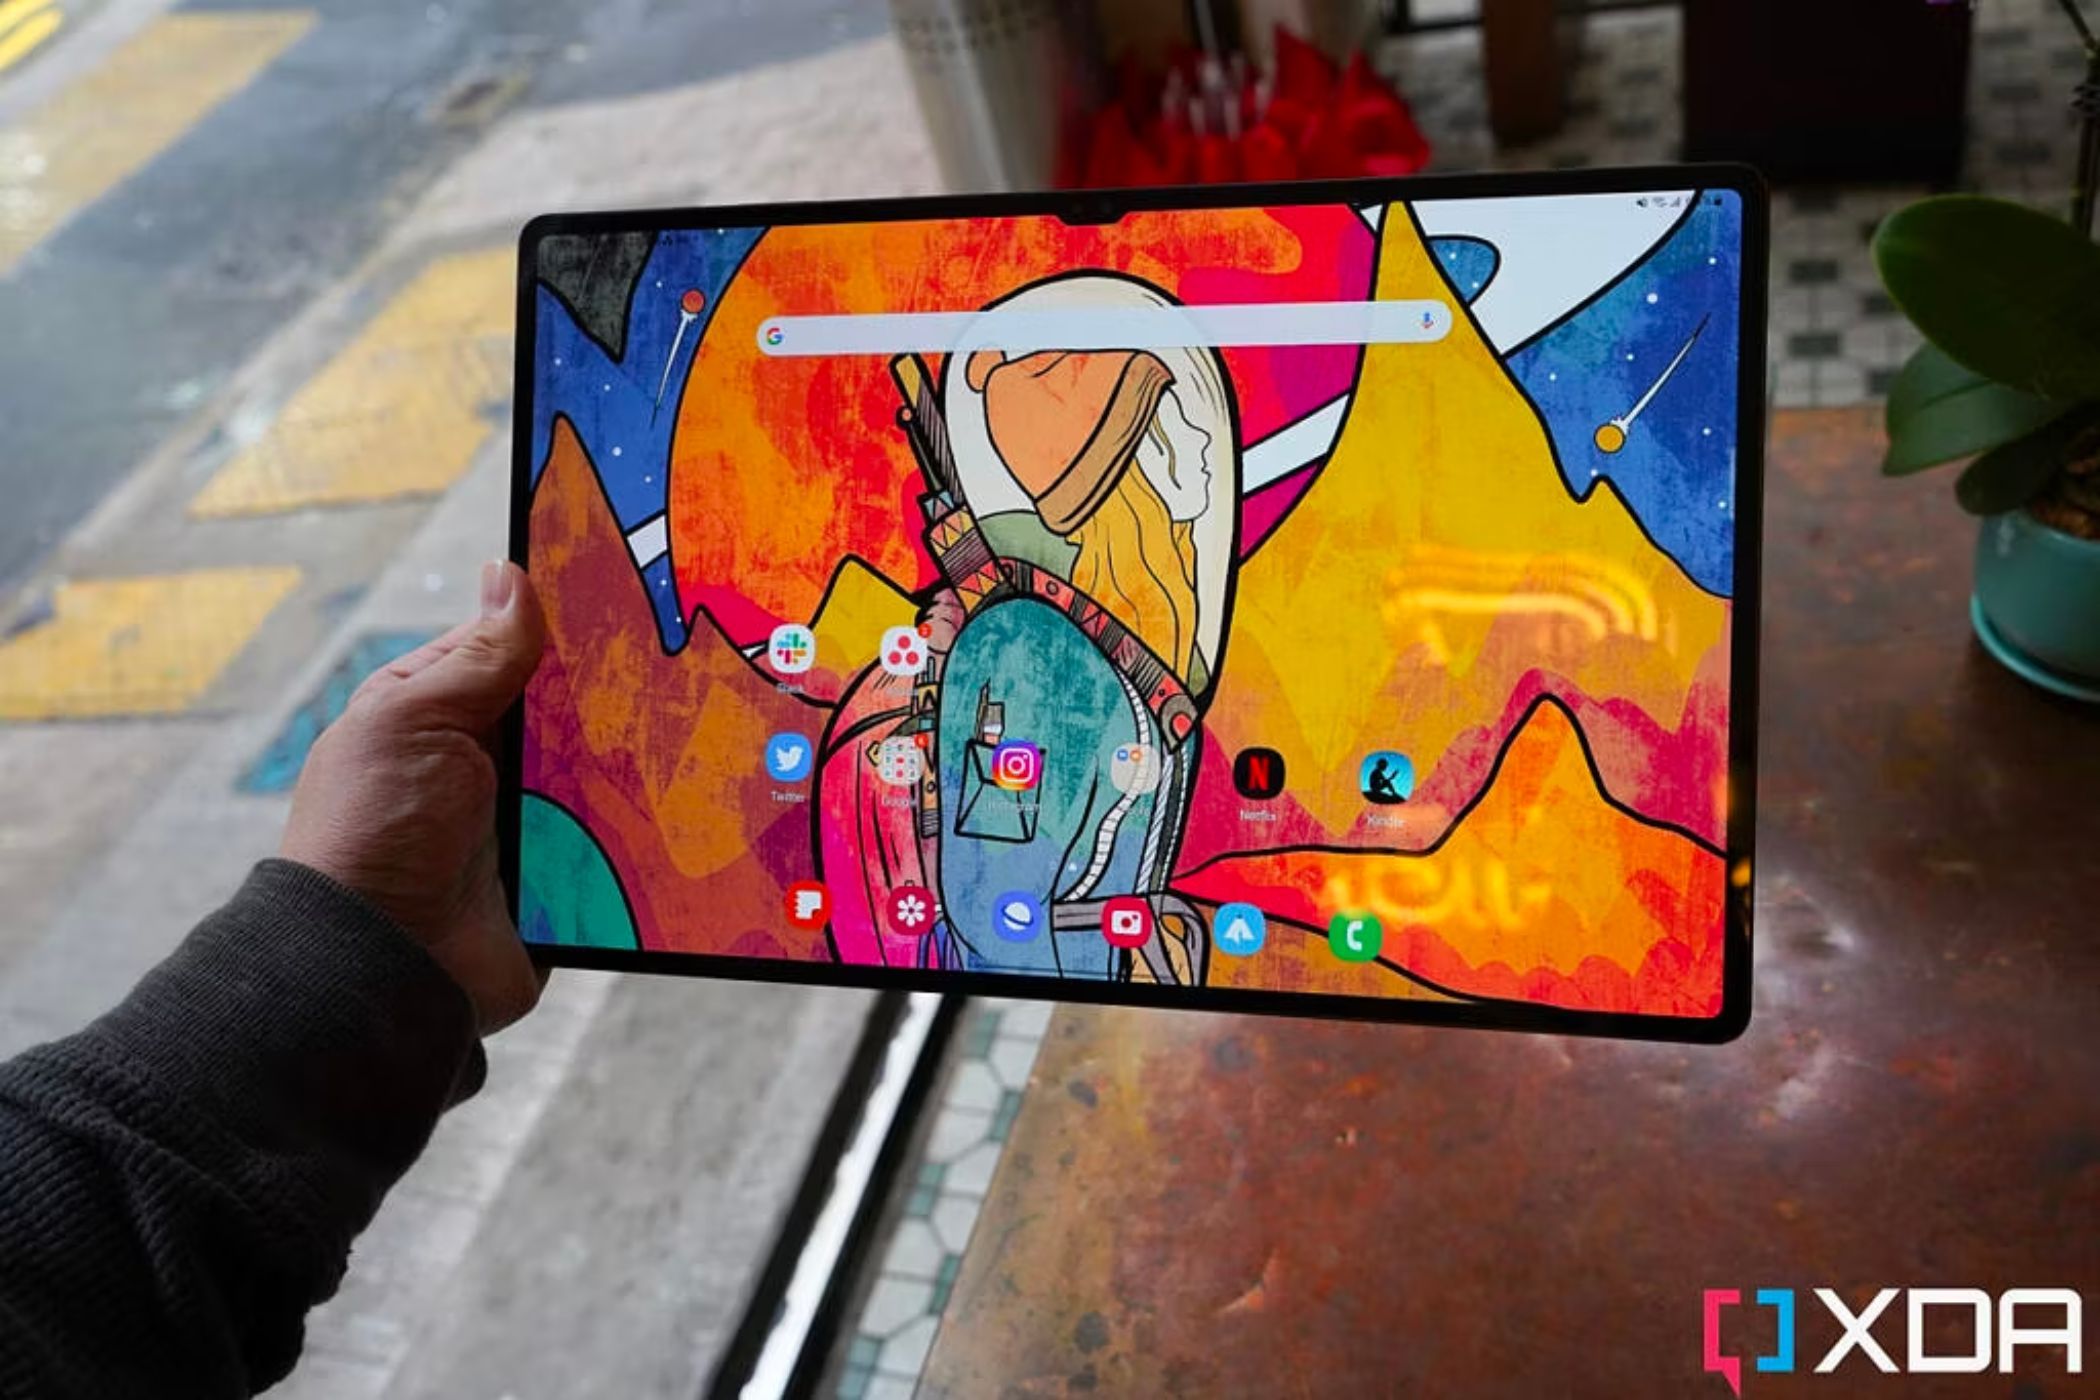 An image of a person holding a Samsung Galaxy Tab S8 Ultra tablet over a wooden table.